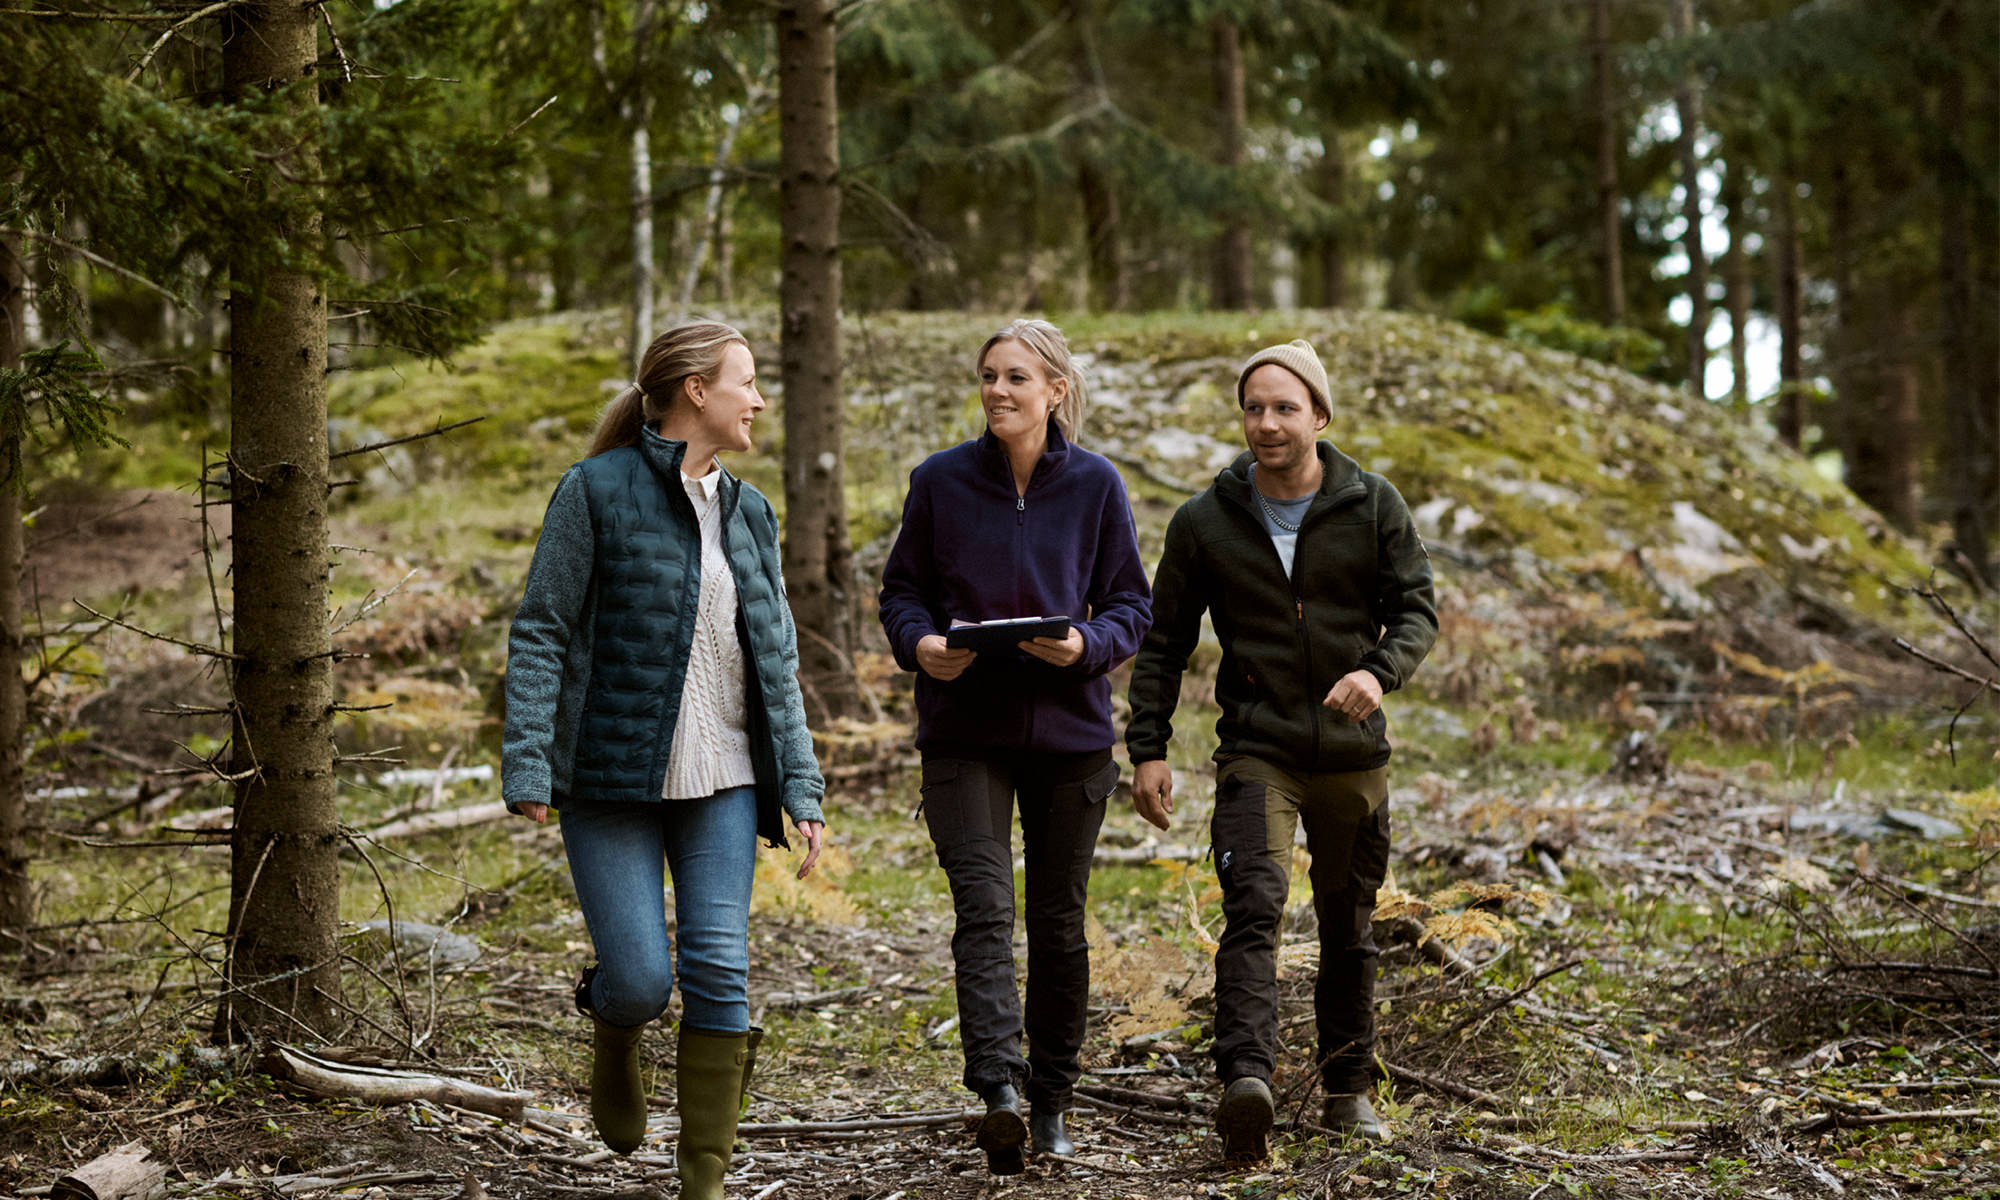 Three people walking in a forest